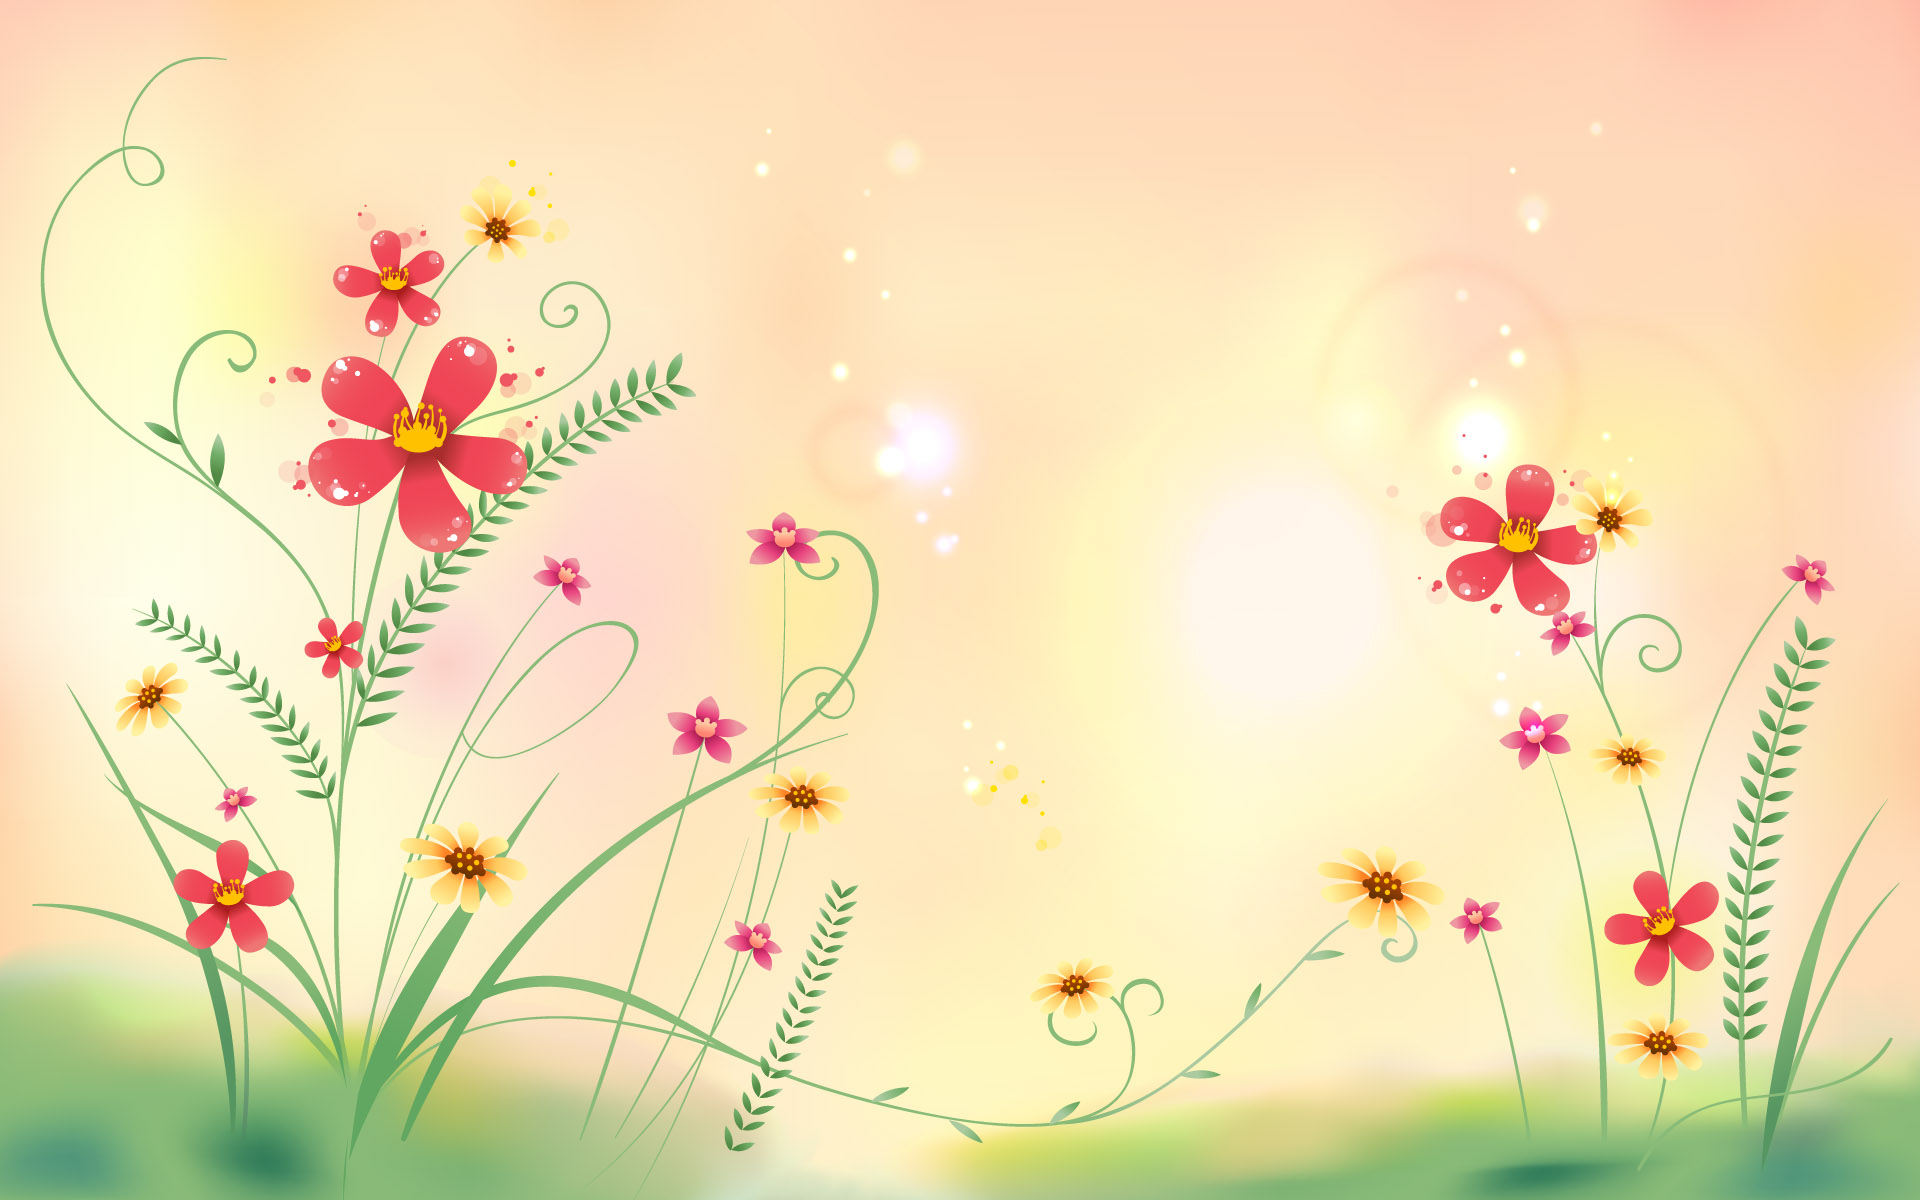 Abstract Spring Flowers Wallpaper Free Abstract Spring Flowers Background